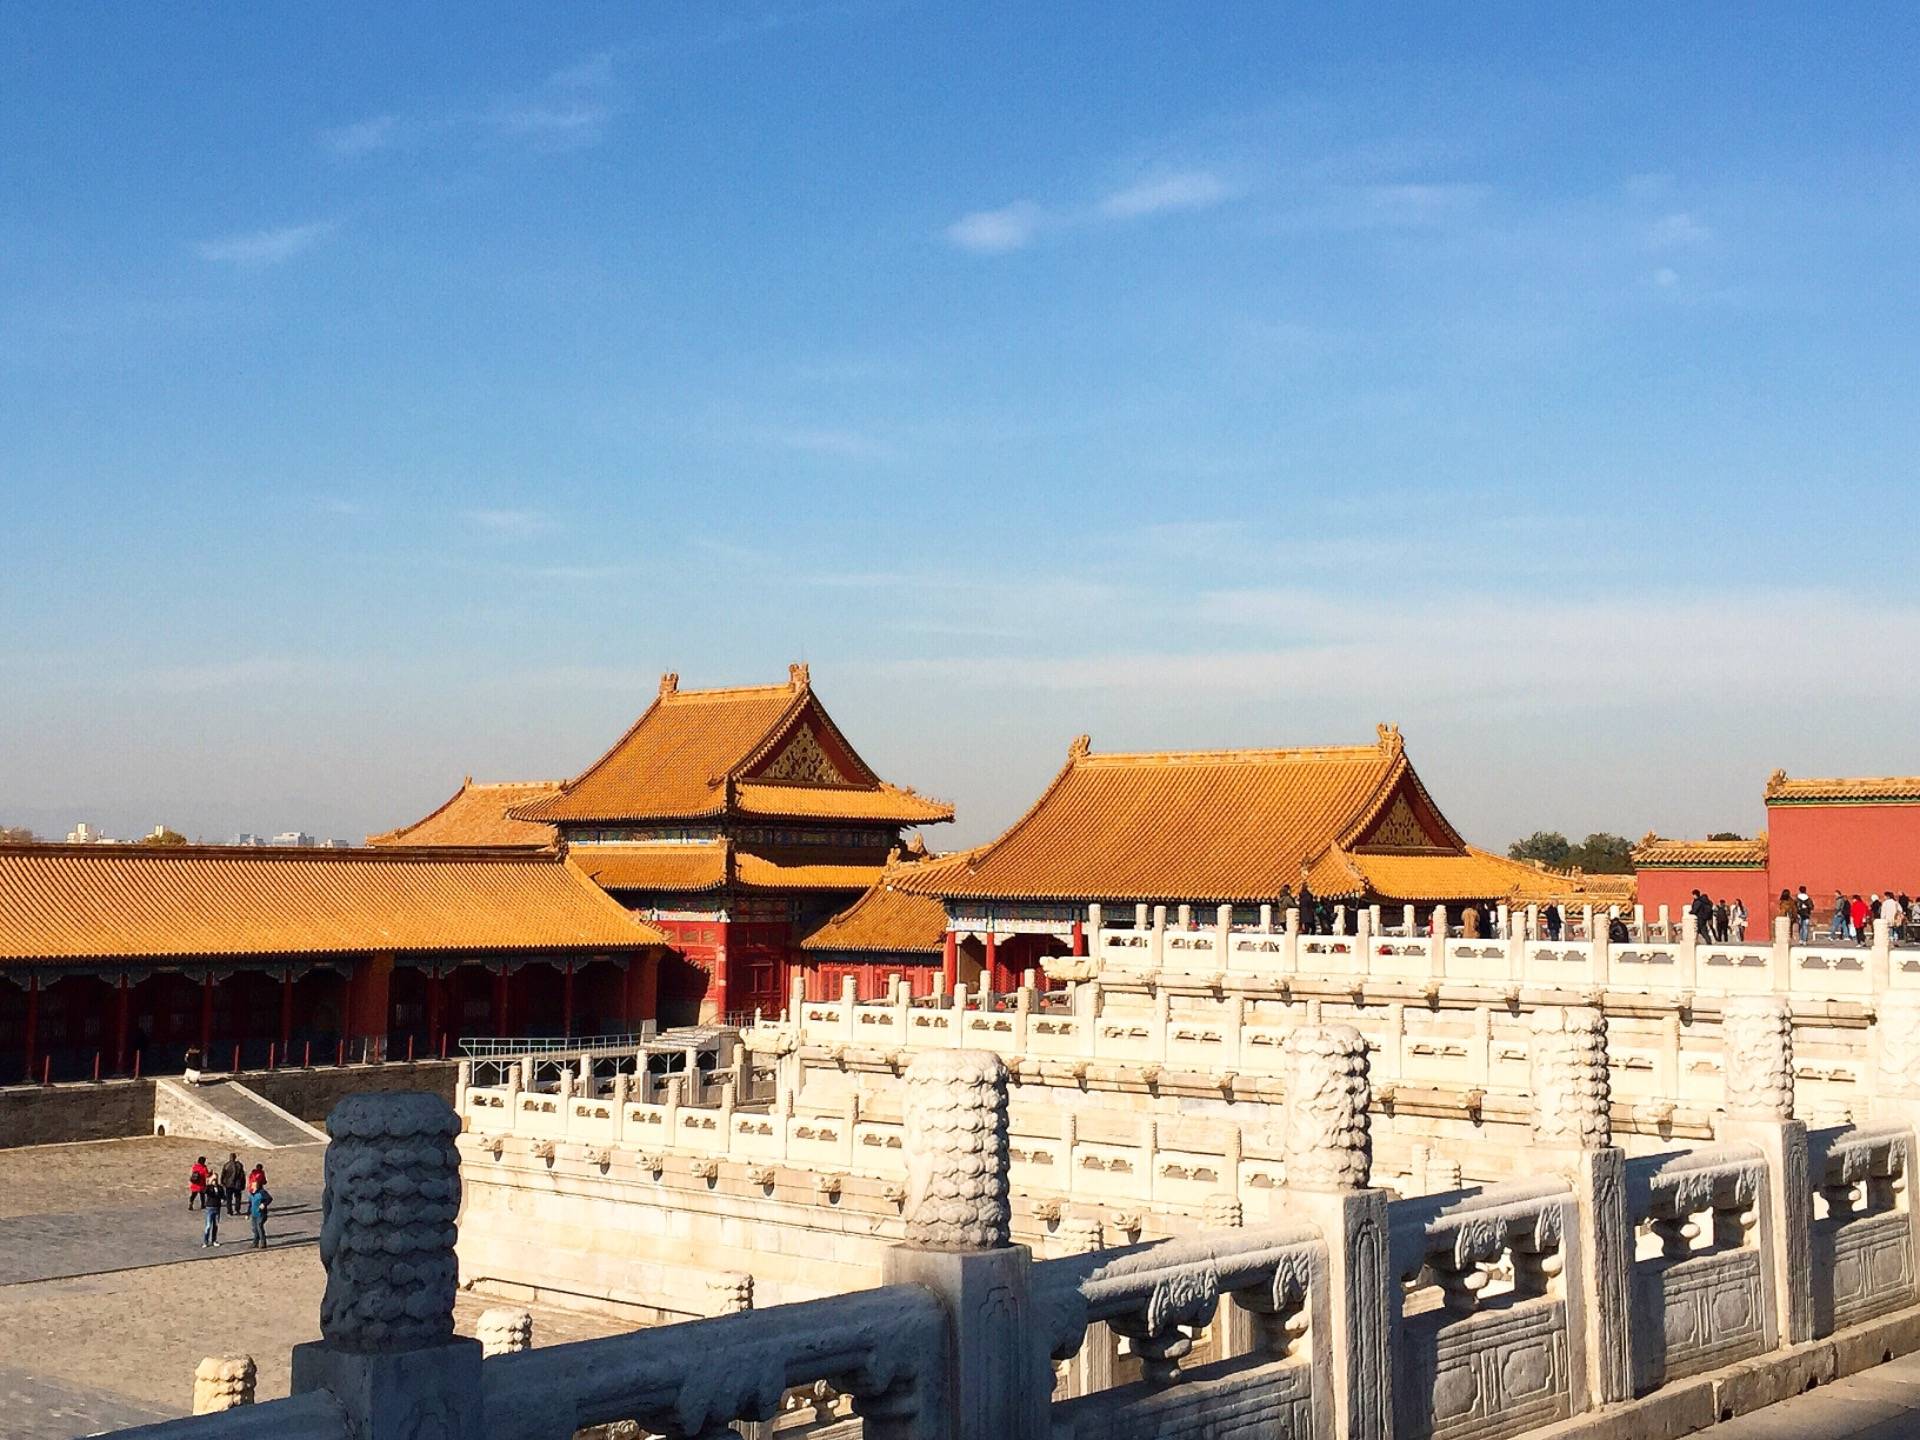 Forbidden City, Beijing - From the historical dramas to the real experience